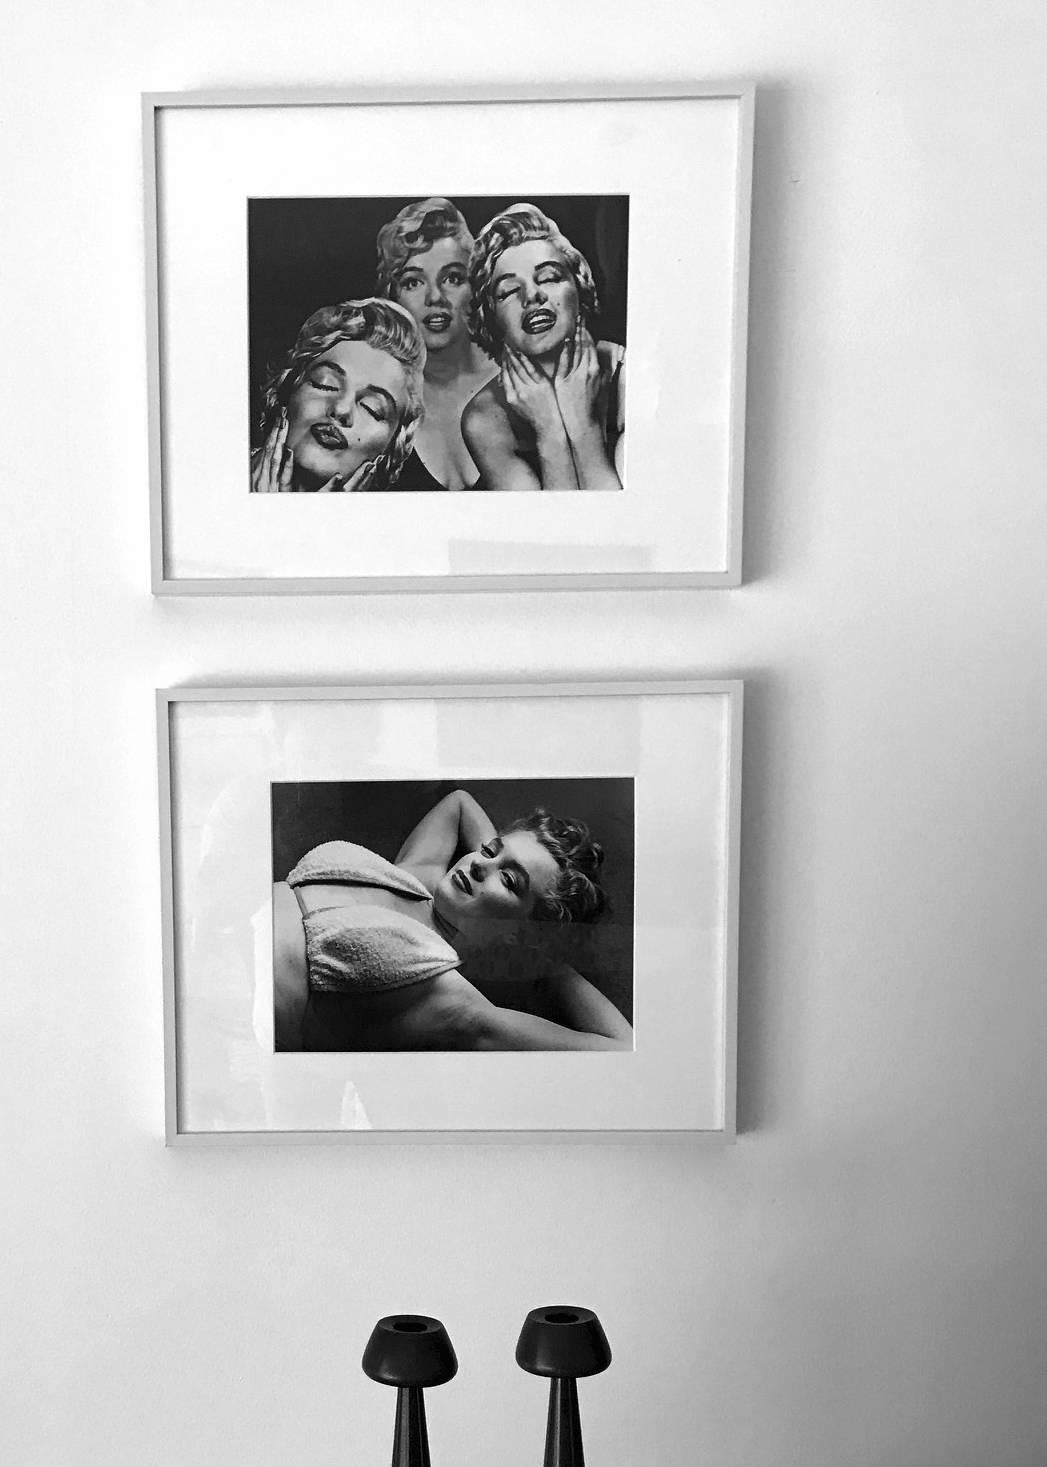 Marilyn Monroe Photograph by Philippe Halsman In Good Condition For Sale In Atlanta, GA